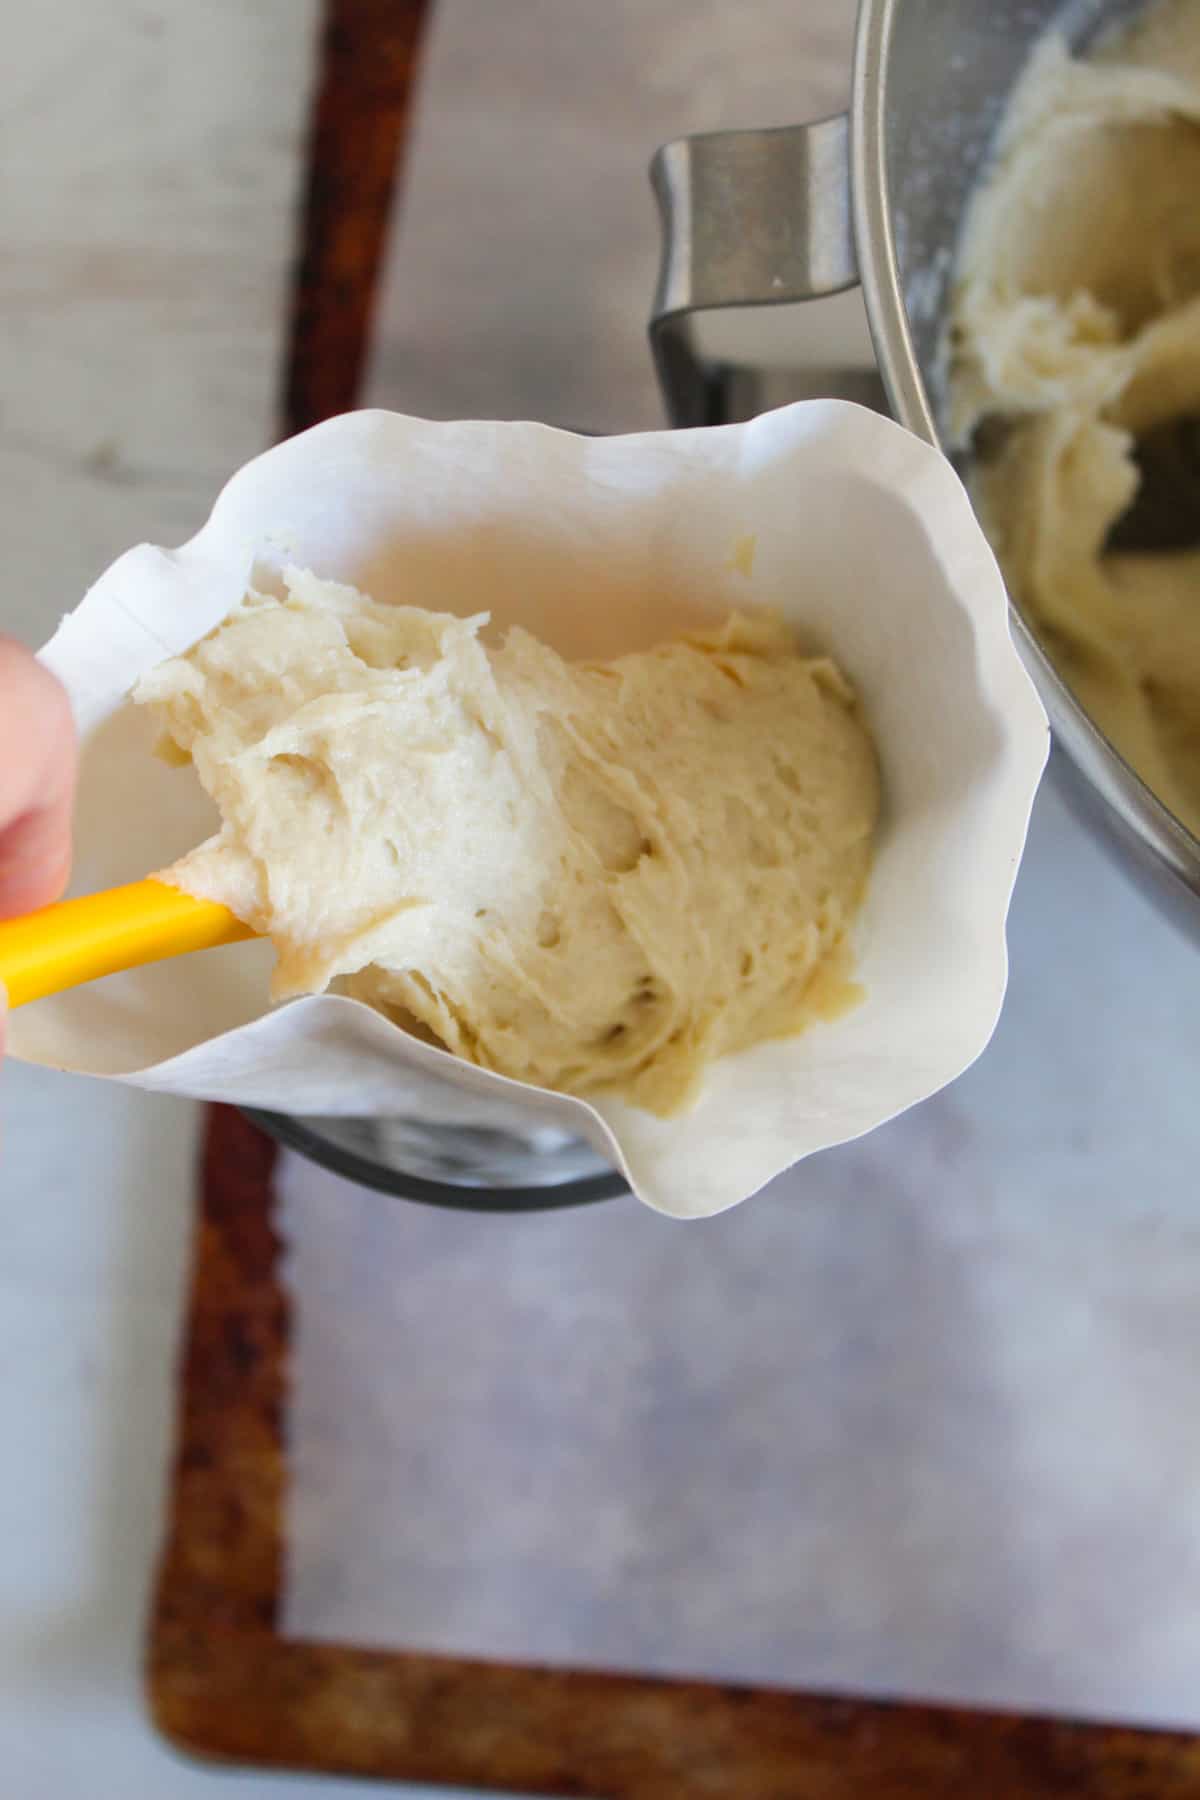 placing bread dough in a pastry bag